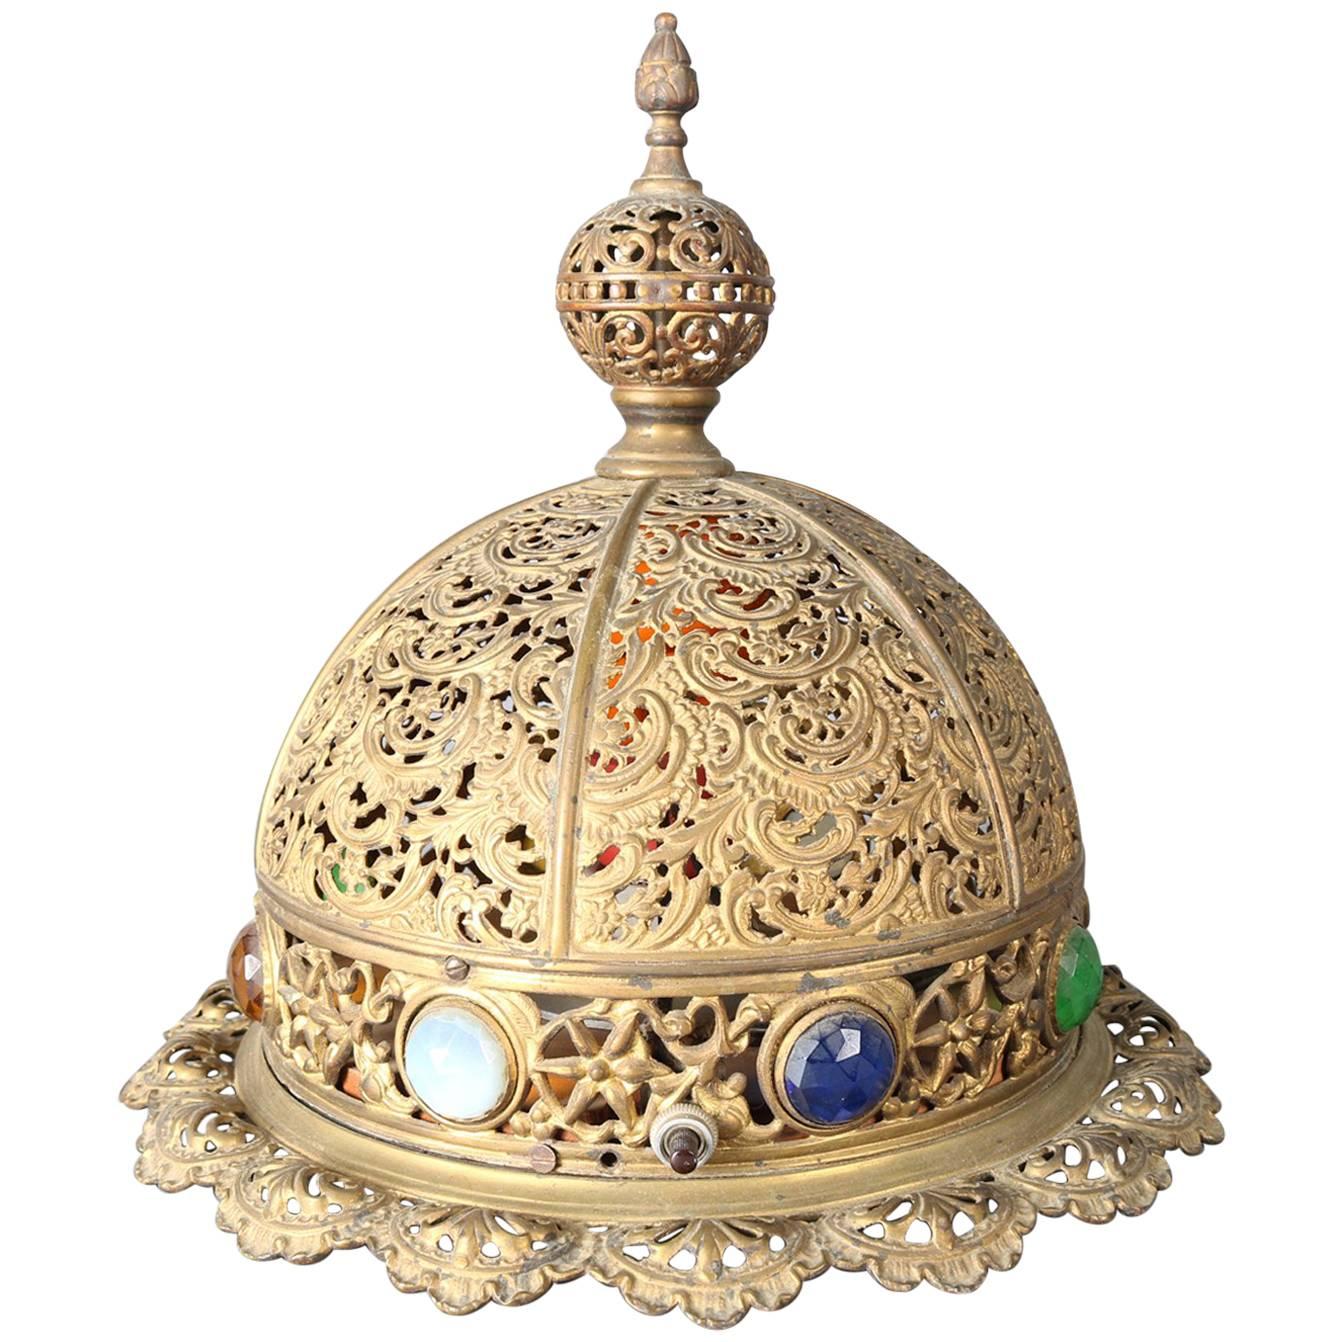 Antique Moorish Jewelled and Reticulated Brass Moroccan Dome Table Lamp